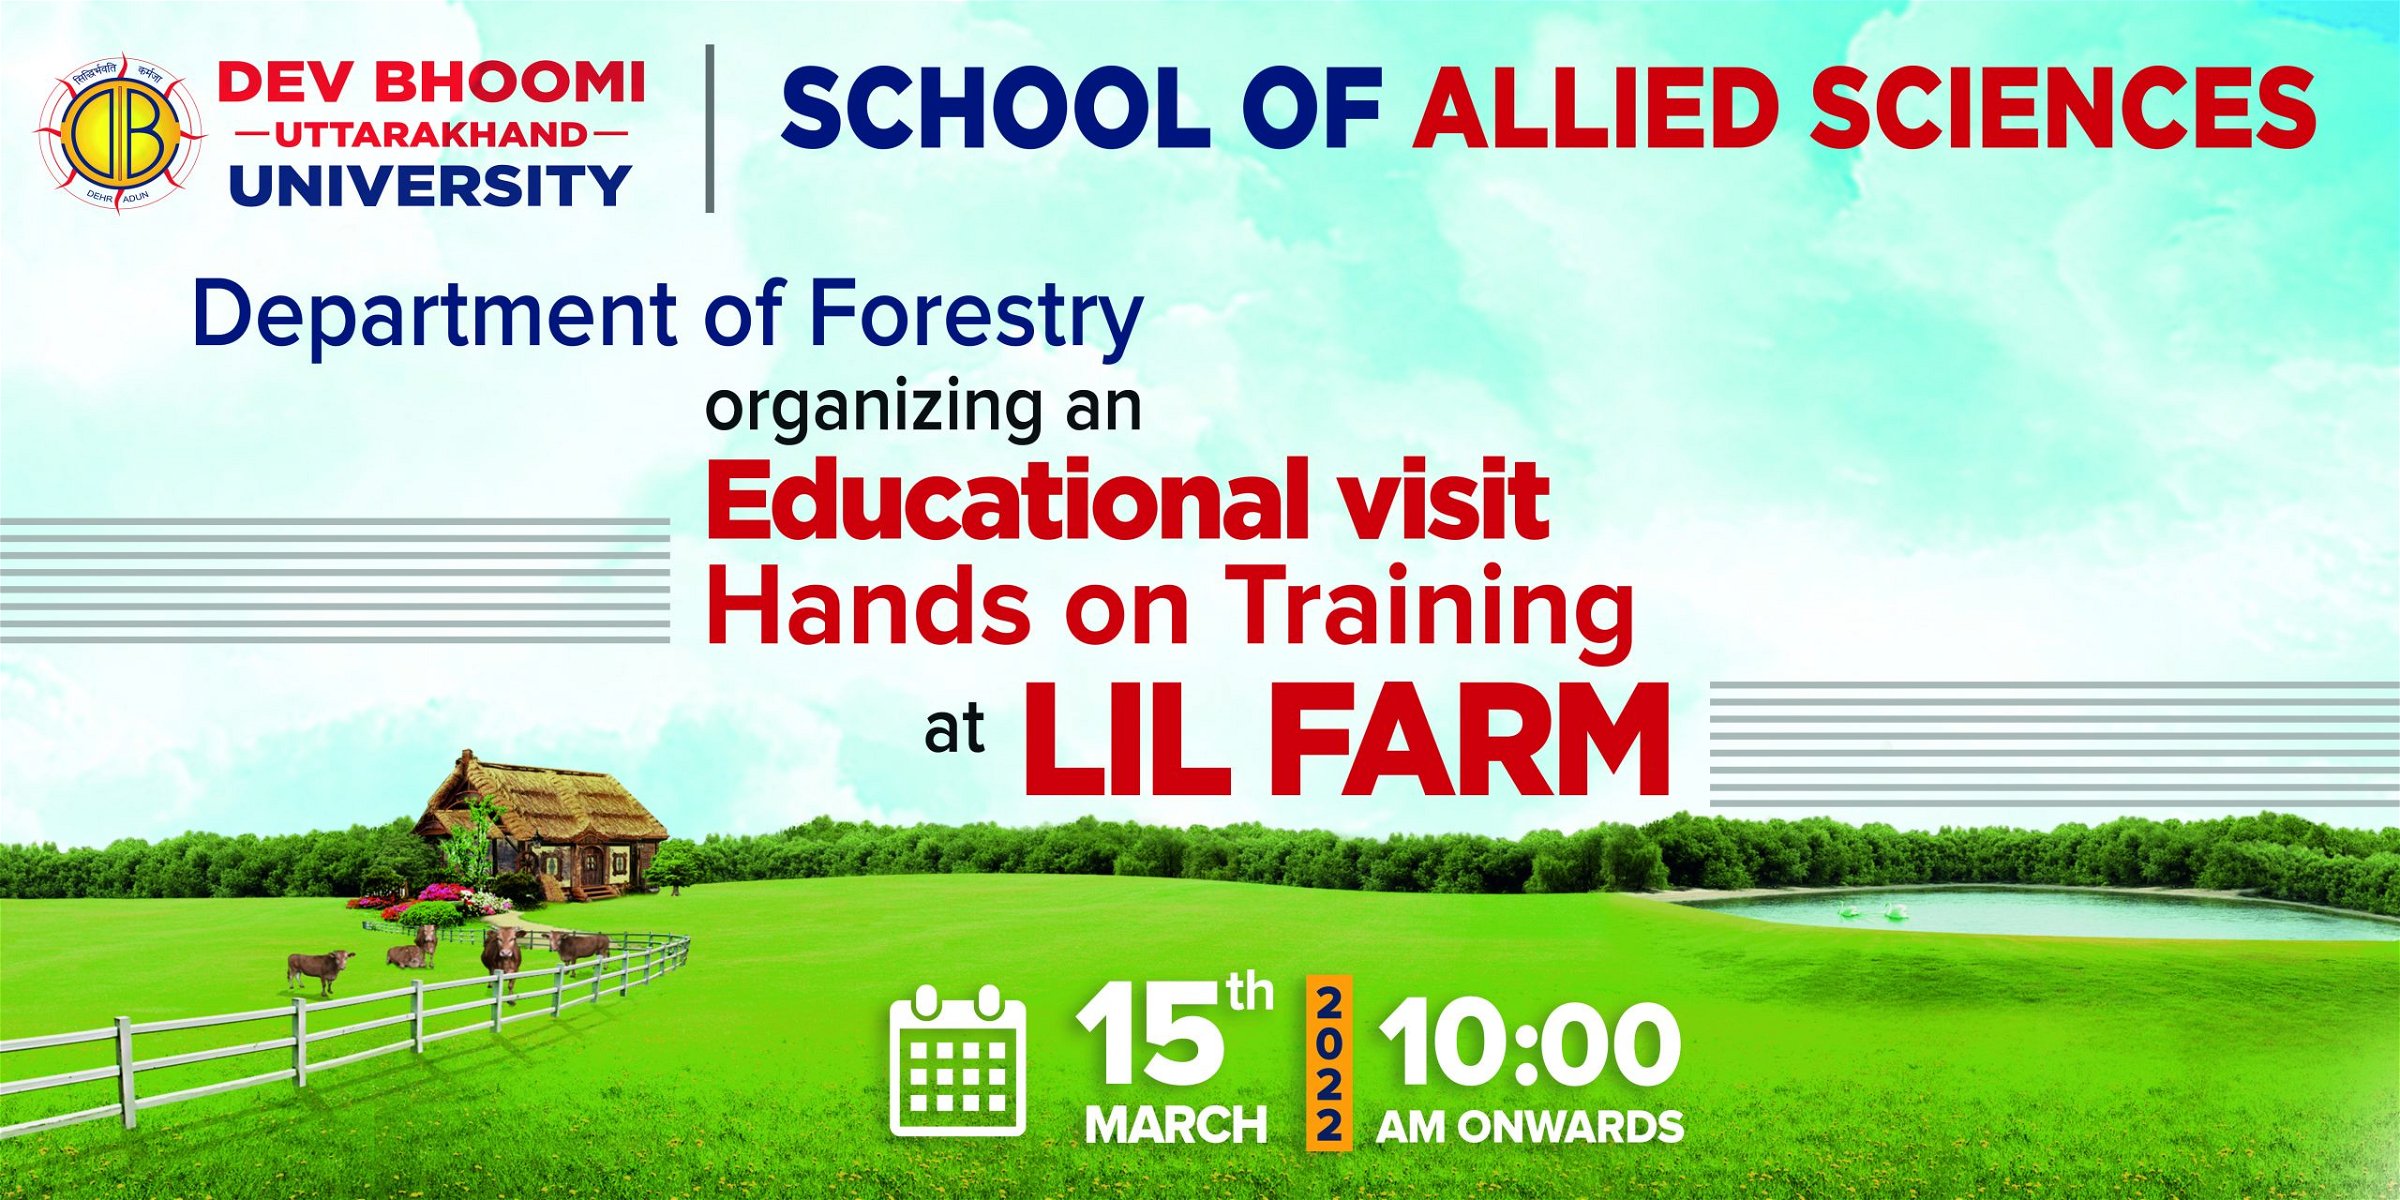 Educational visit and hands on training at LIL FARM